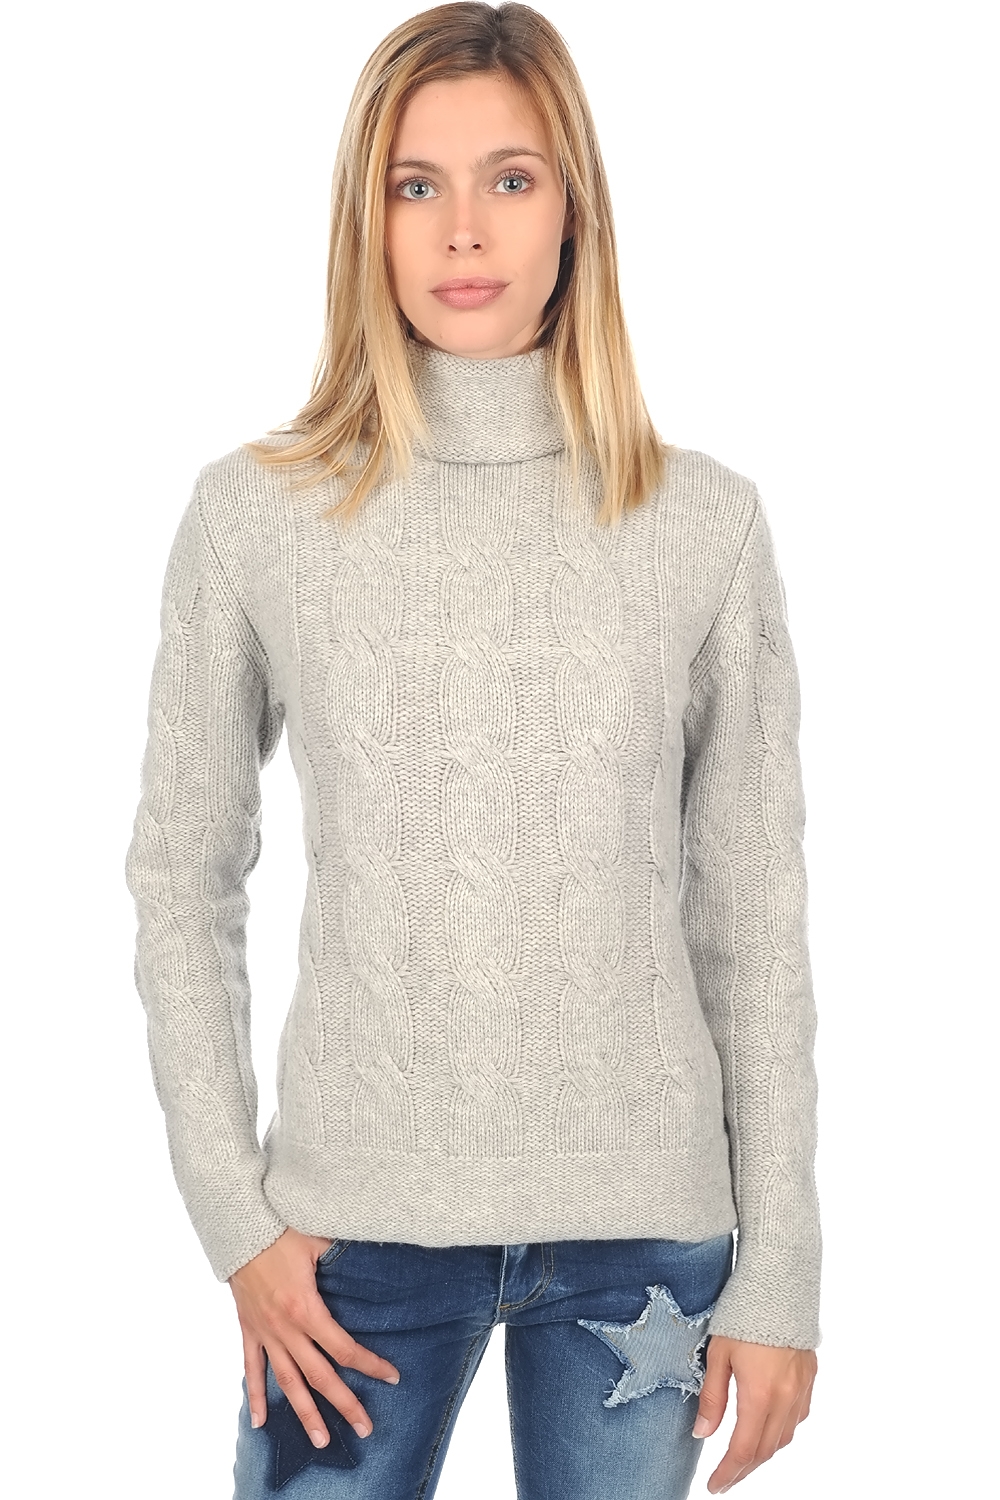 Cachemire pull femme blanche flanelle chine 3xl